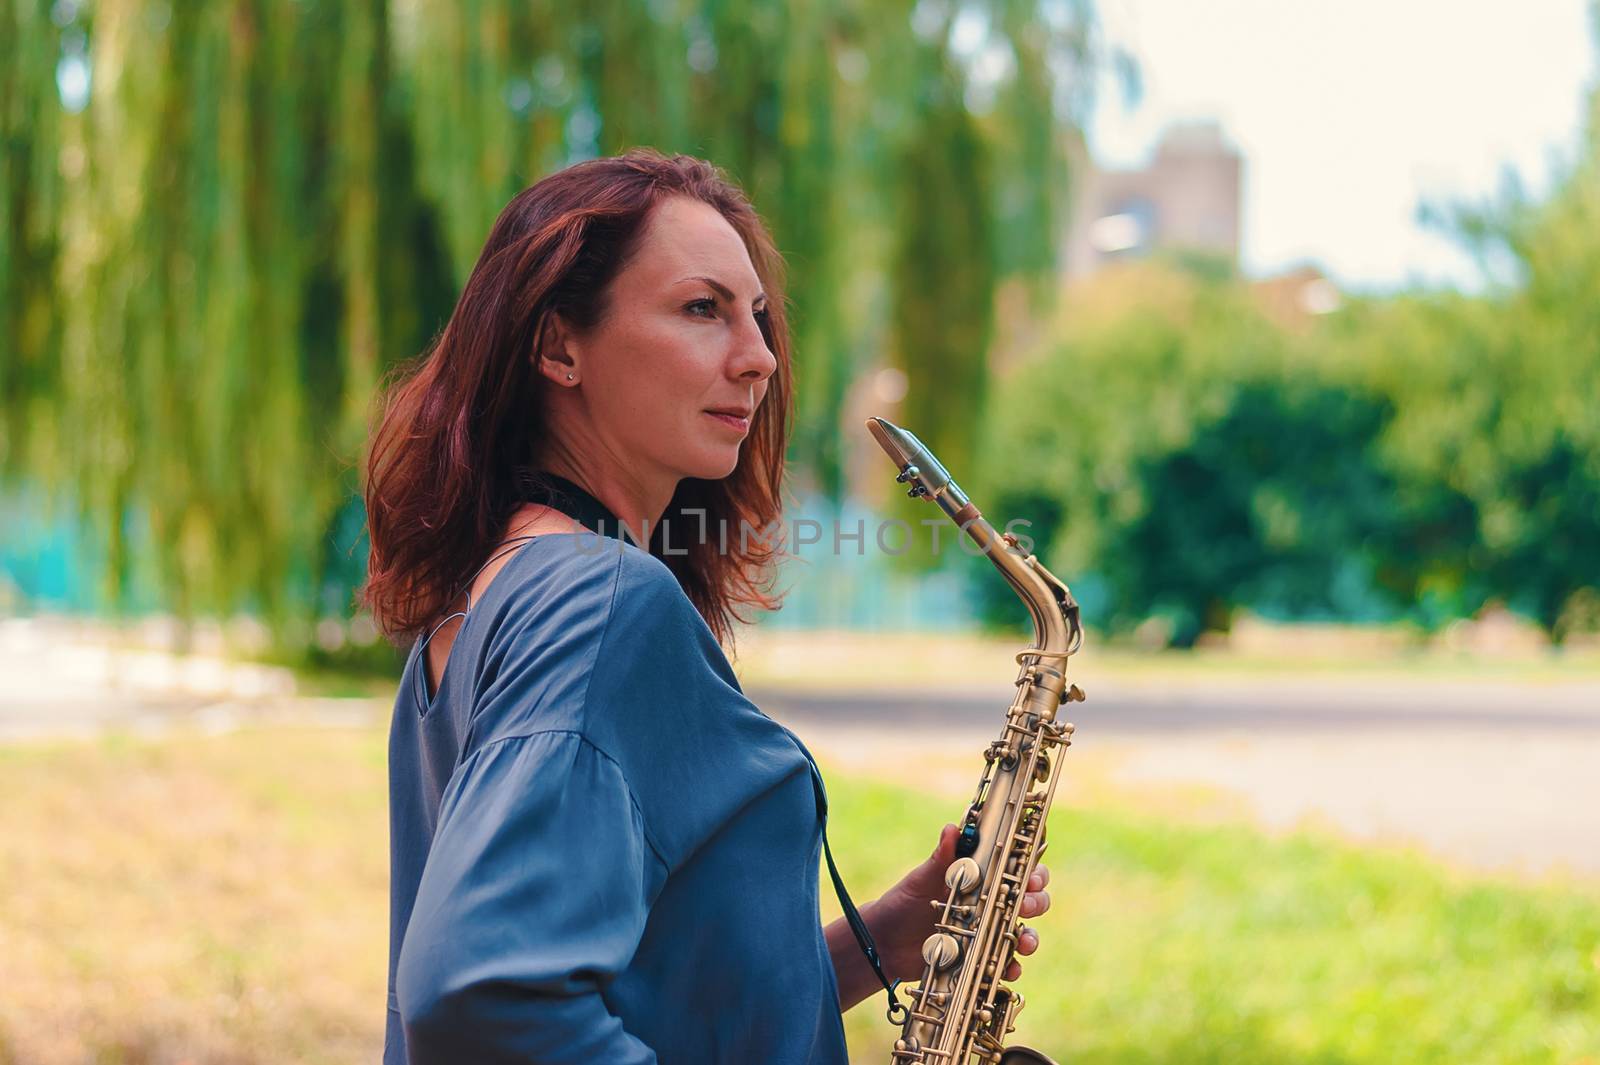 cute young redhead girl in a blue blouse posing with a saxophone in the park by chernobrovin